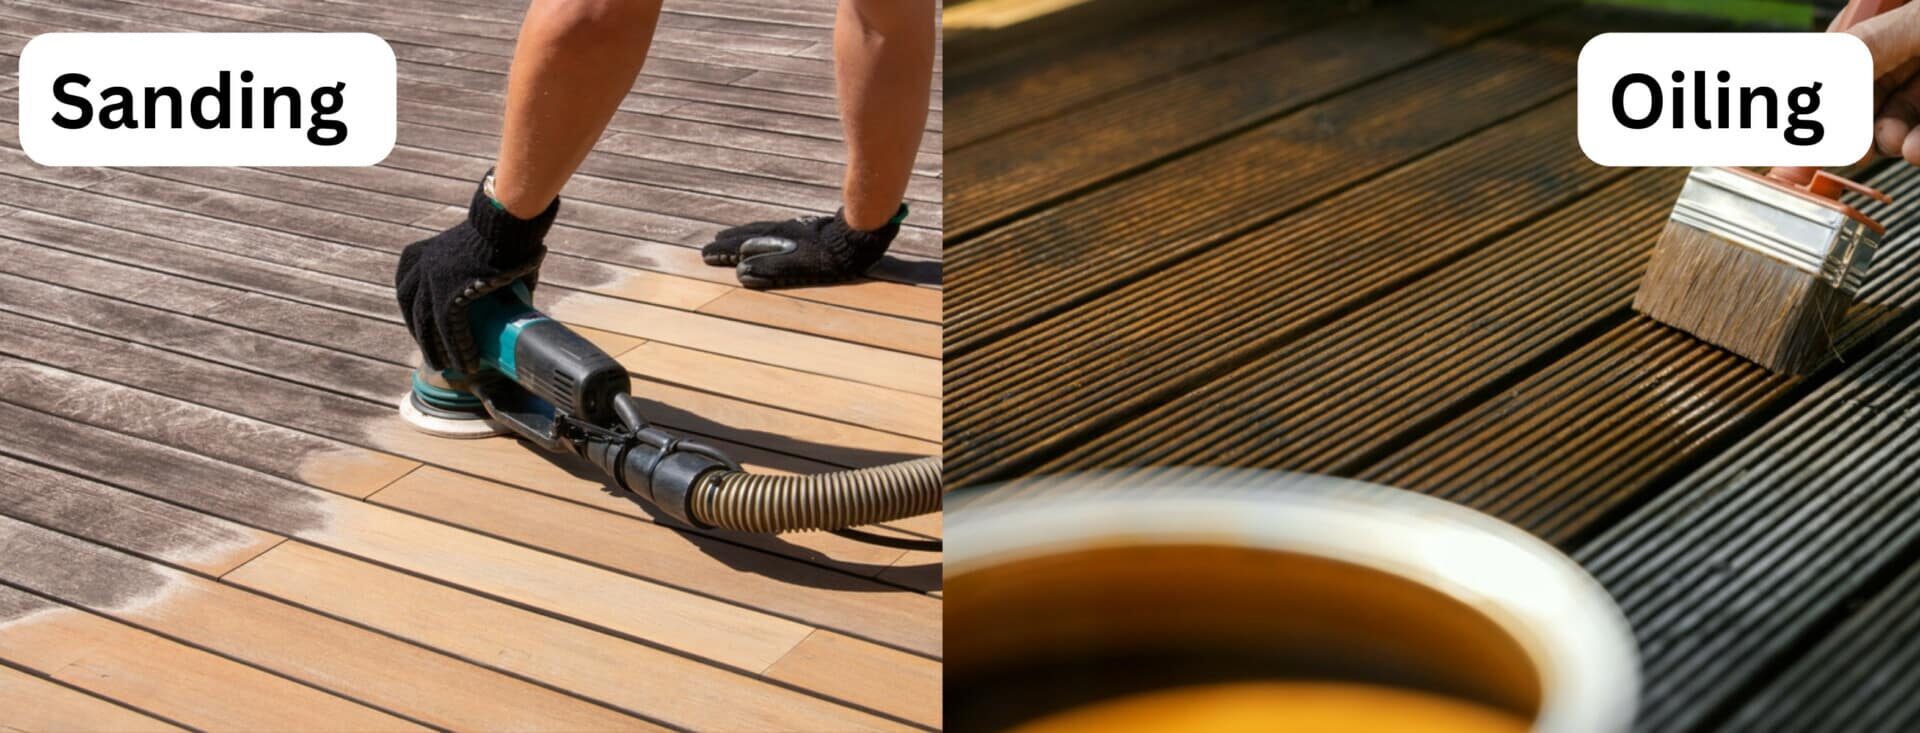 A person wearing gloves and safety glasses sands a wooden deck while another person applies oil to the wood.